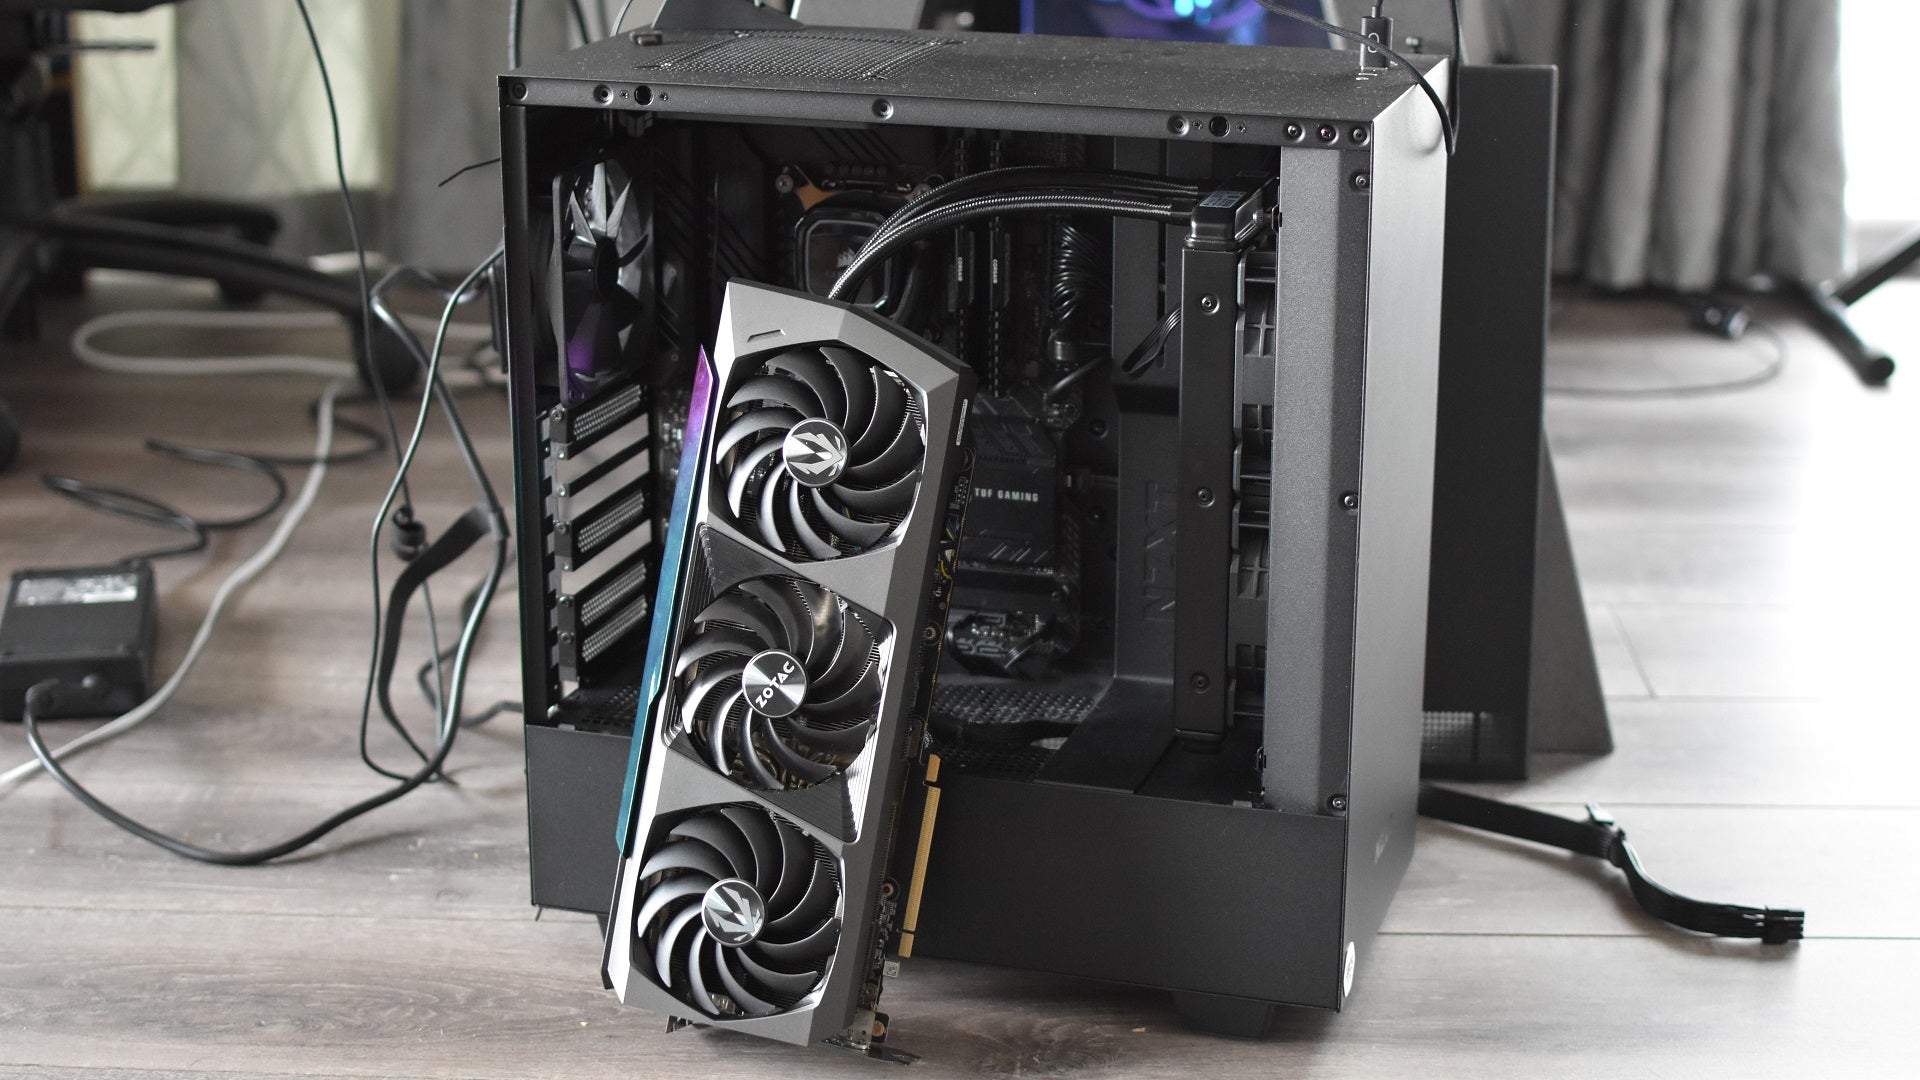 The Zotac GeForce RTX 3090 Ti AMP Extreme Holo graphics card propped up against an open PC case.